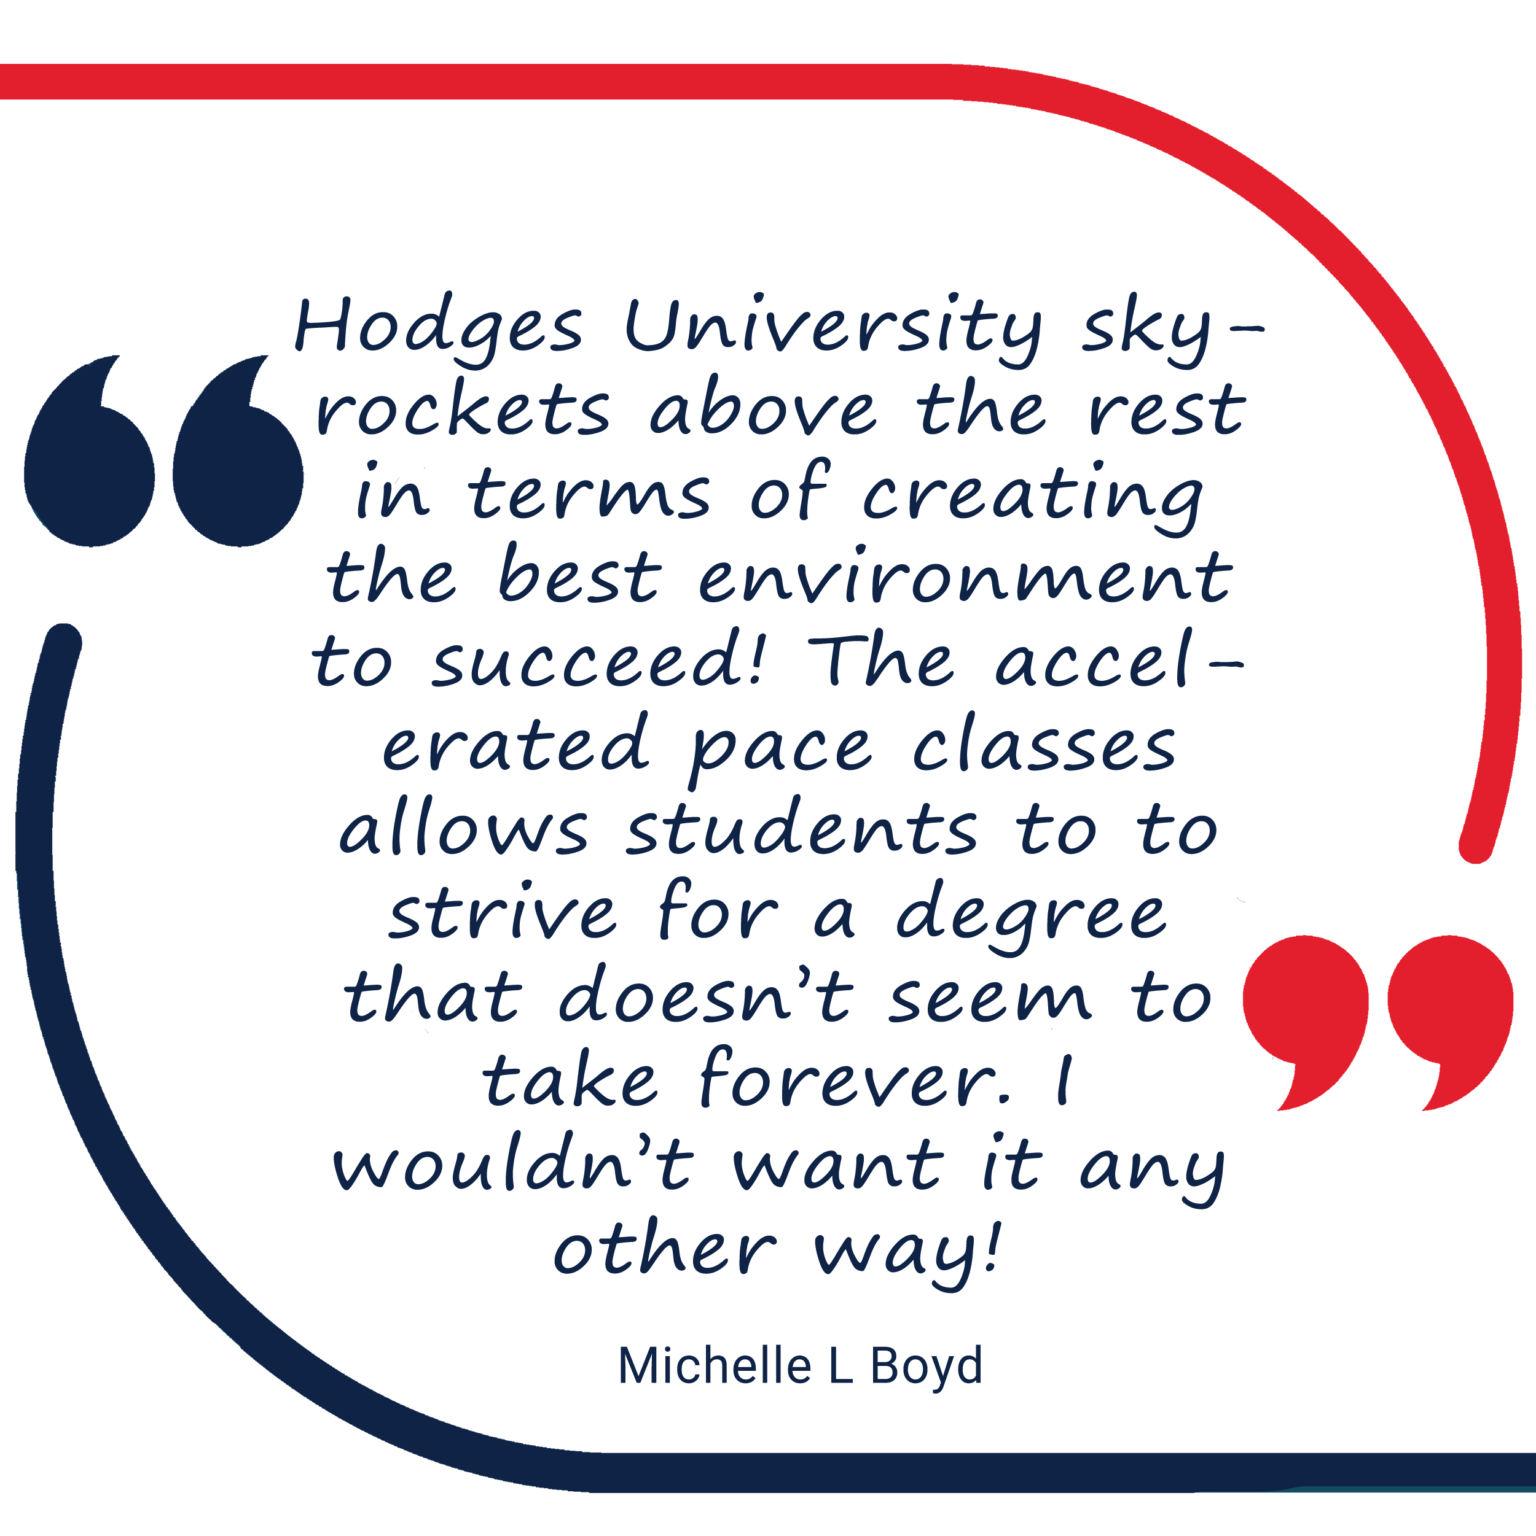 Quote from Hodges student Michelle L Boyd